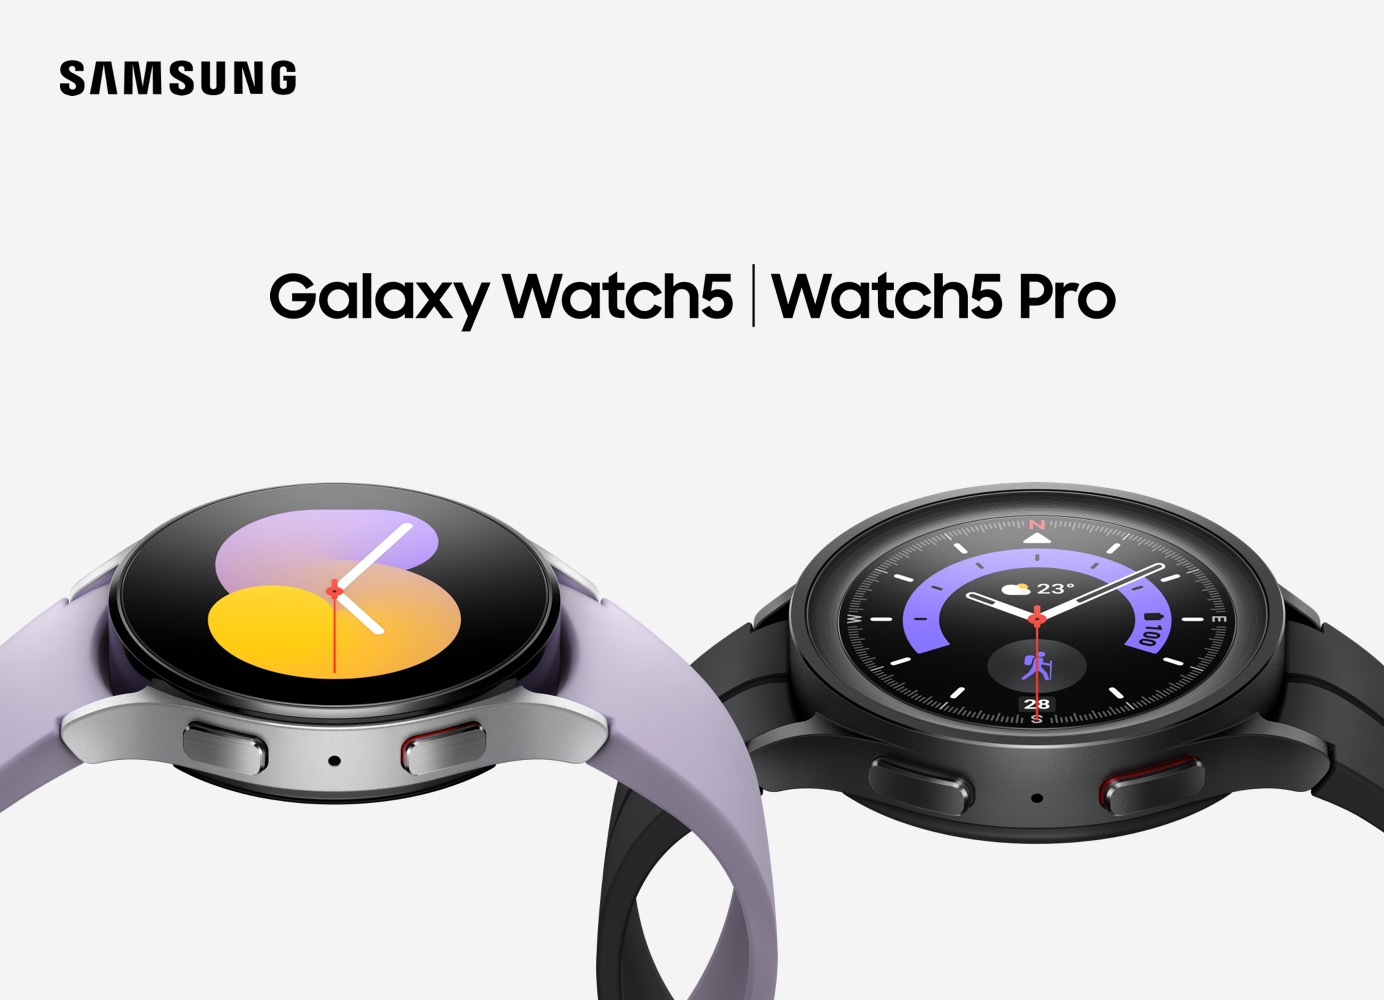 The Samsung Galaxy Watch5 and Watch5 Pro